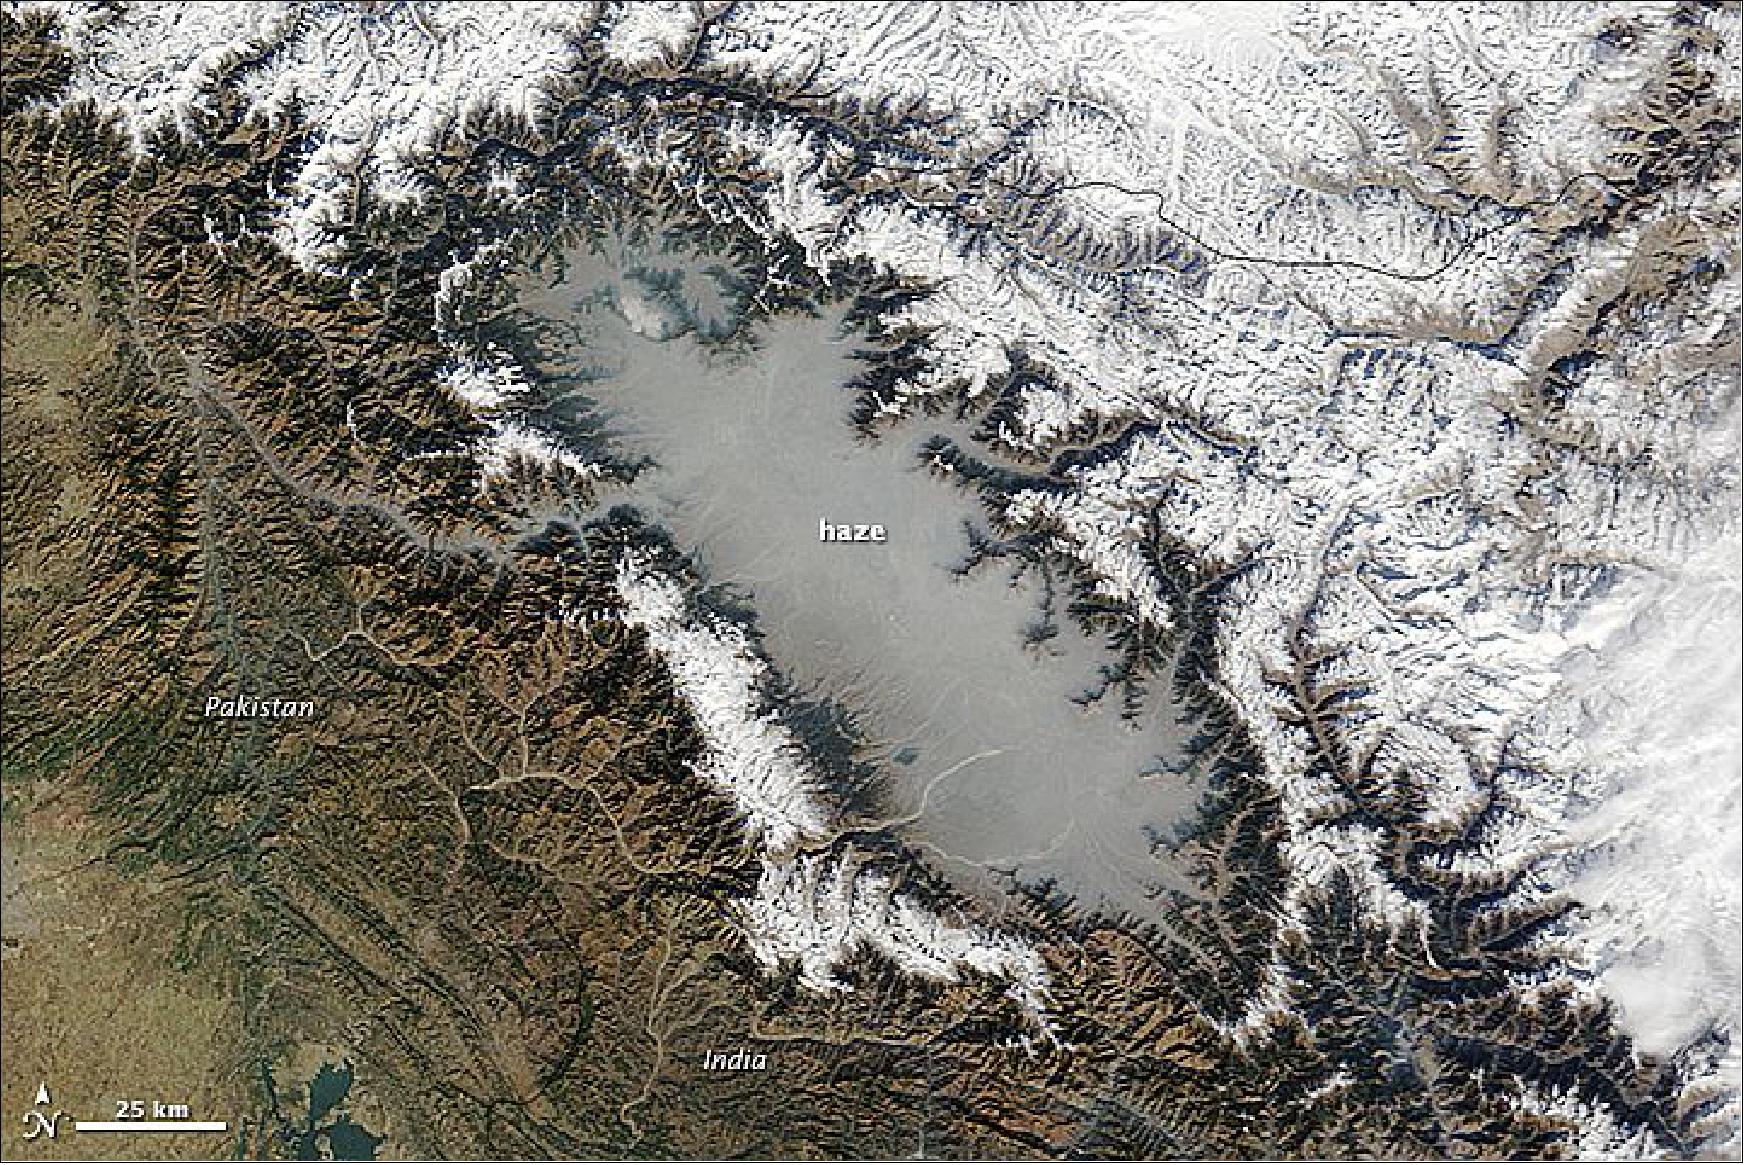 Figure 106: Haze in the Kashmir Valley, acquired by MODIS on Terra on Dec. 5, 2014 (image credit: NASA, Jeff Schmalz)